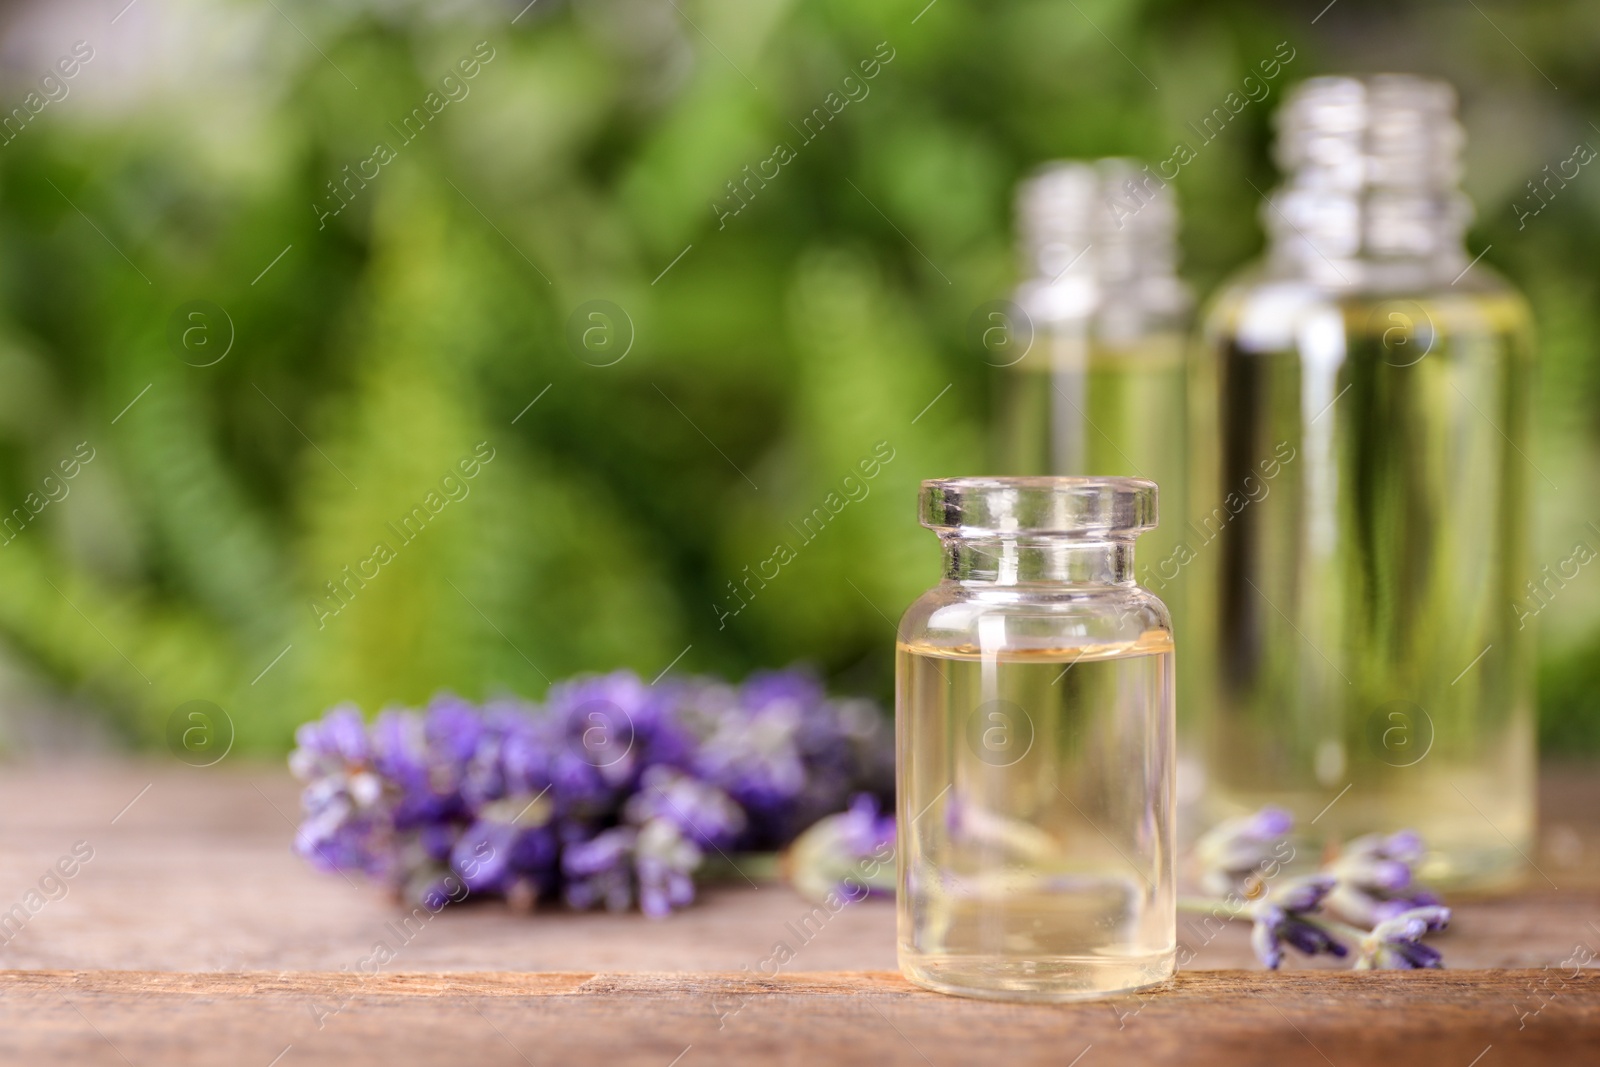 Photo of Bottles with natural lavender essential oil on wooden table against blurred background. Space for text